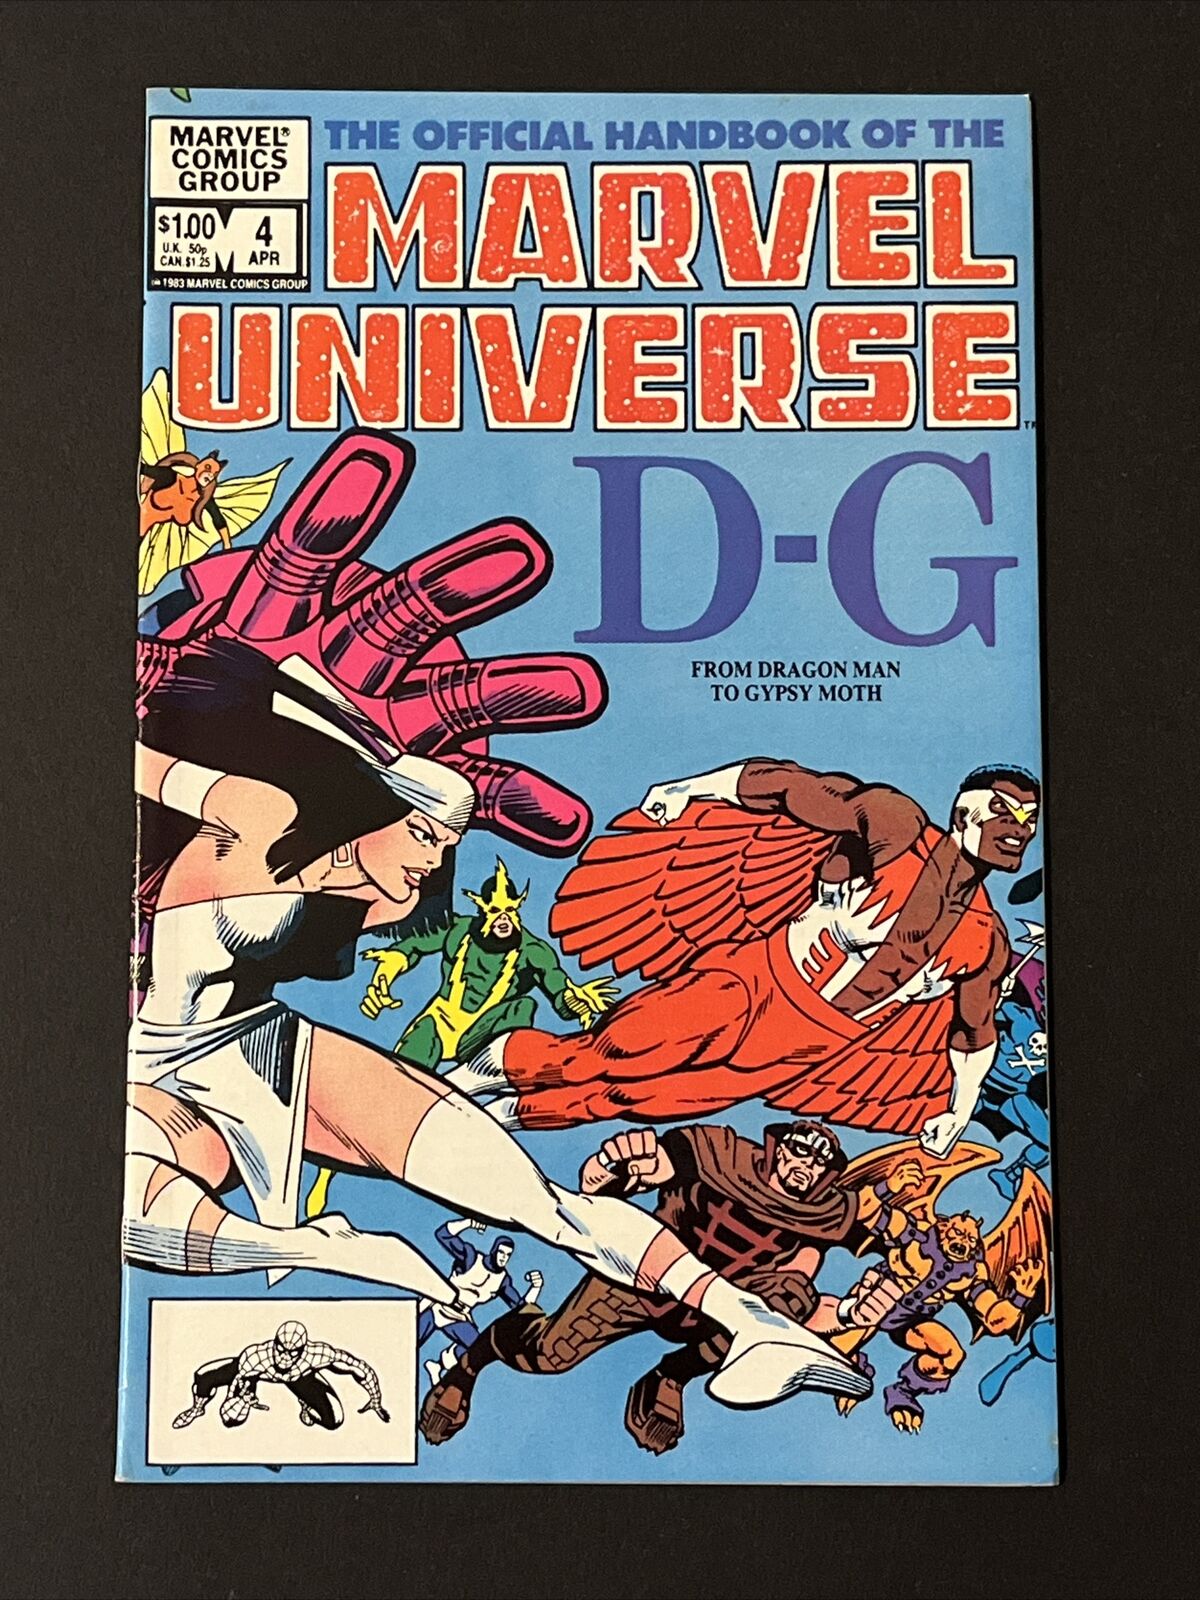 THE OFFICIAL HANDBOOK OF THE MARVEL UNIVERSE #4 VF 1983 D-G